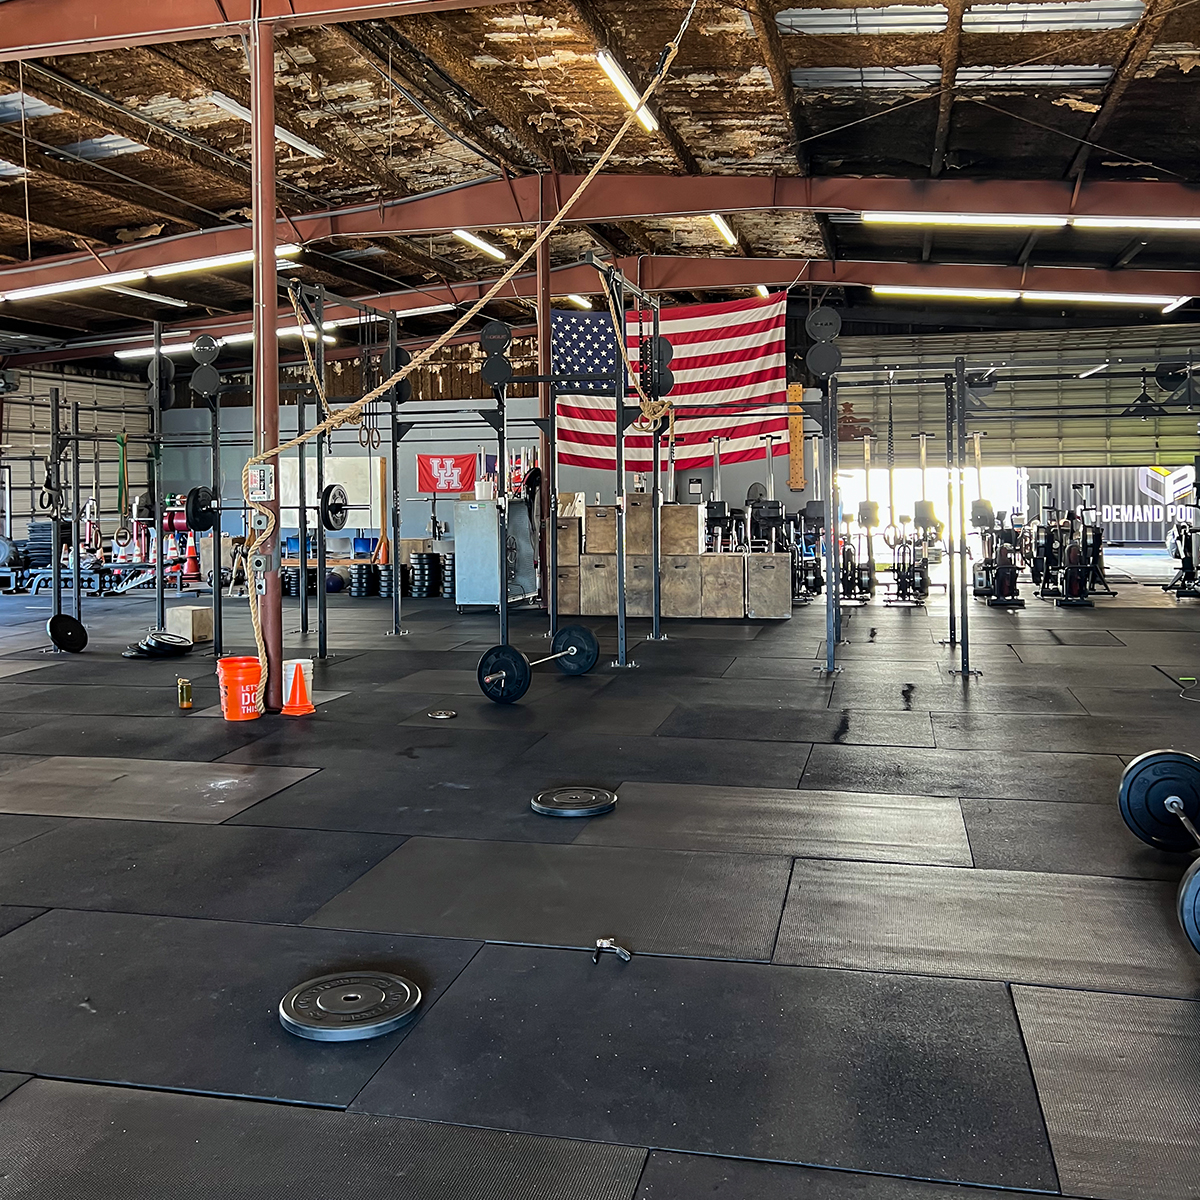 A picture of my weightlifting gym